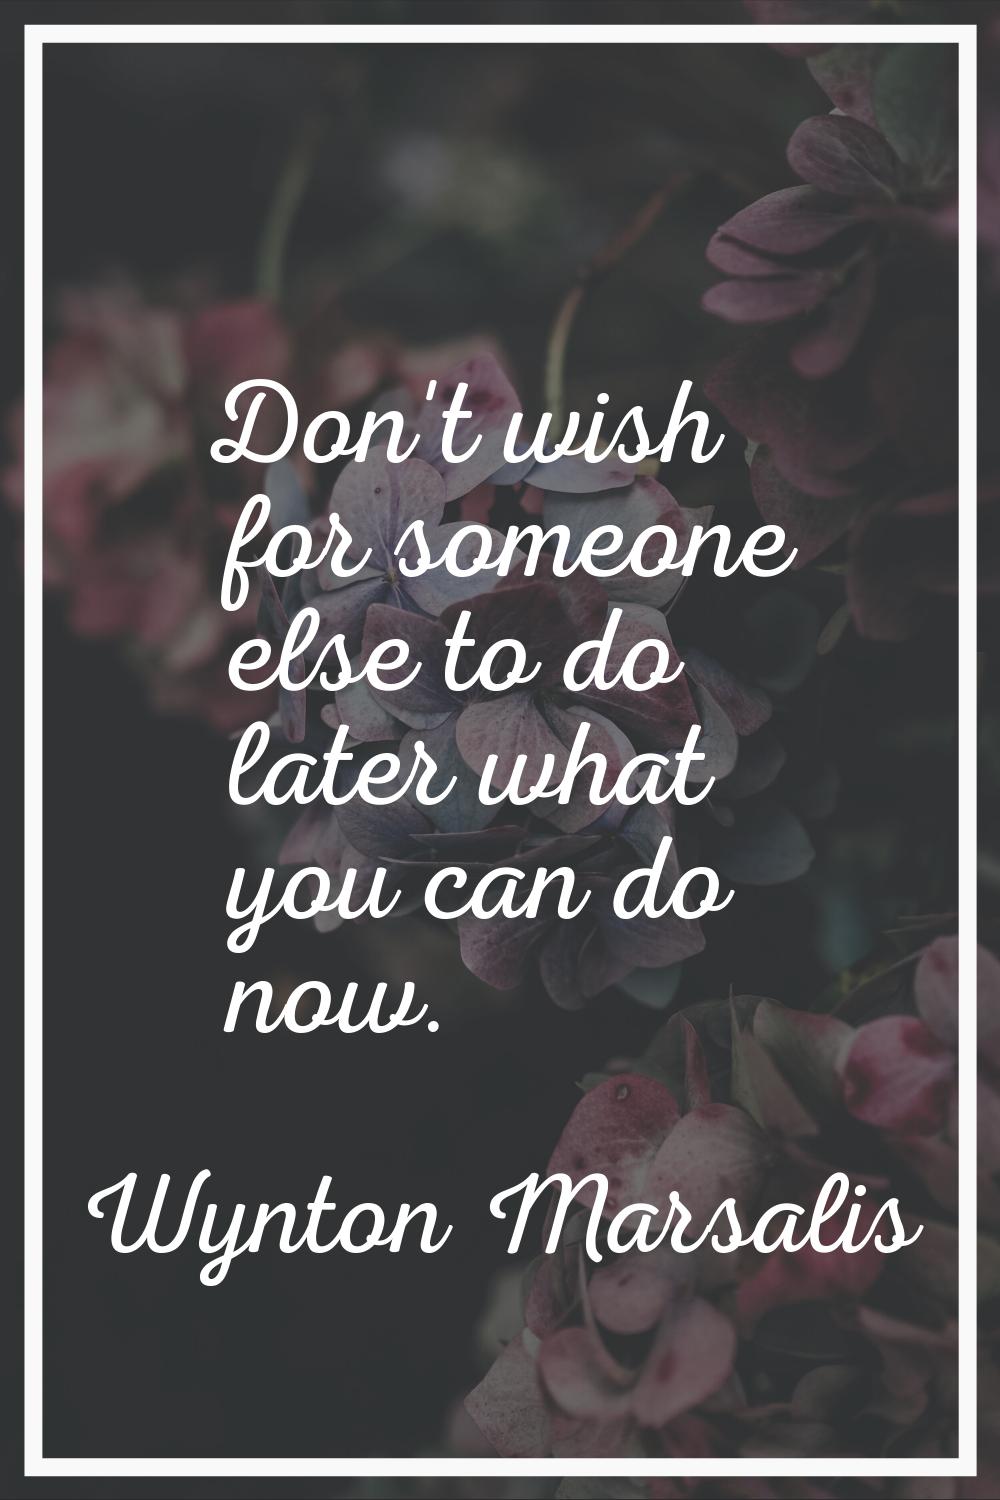 Don't wish for someone else to do later what you can do now.